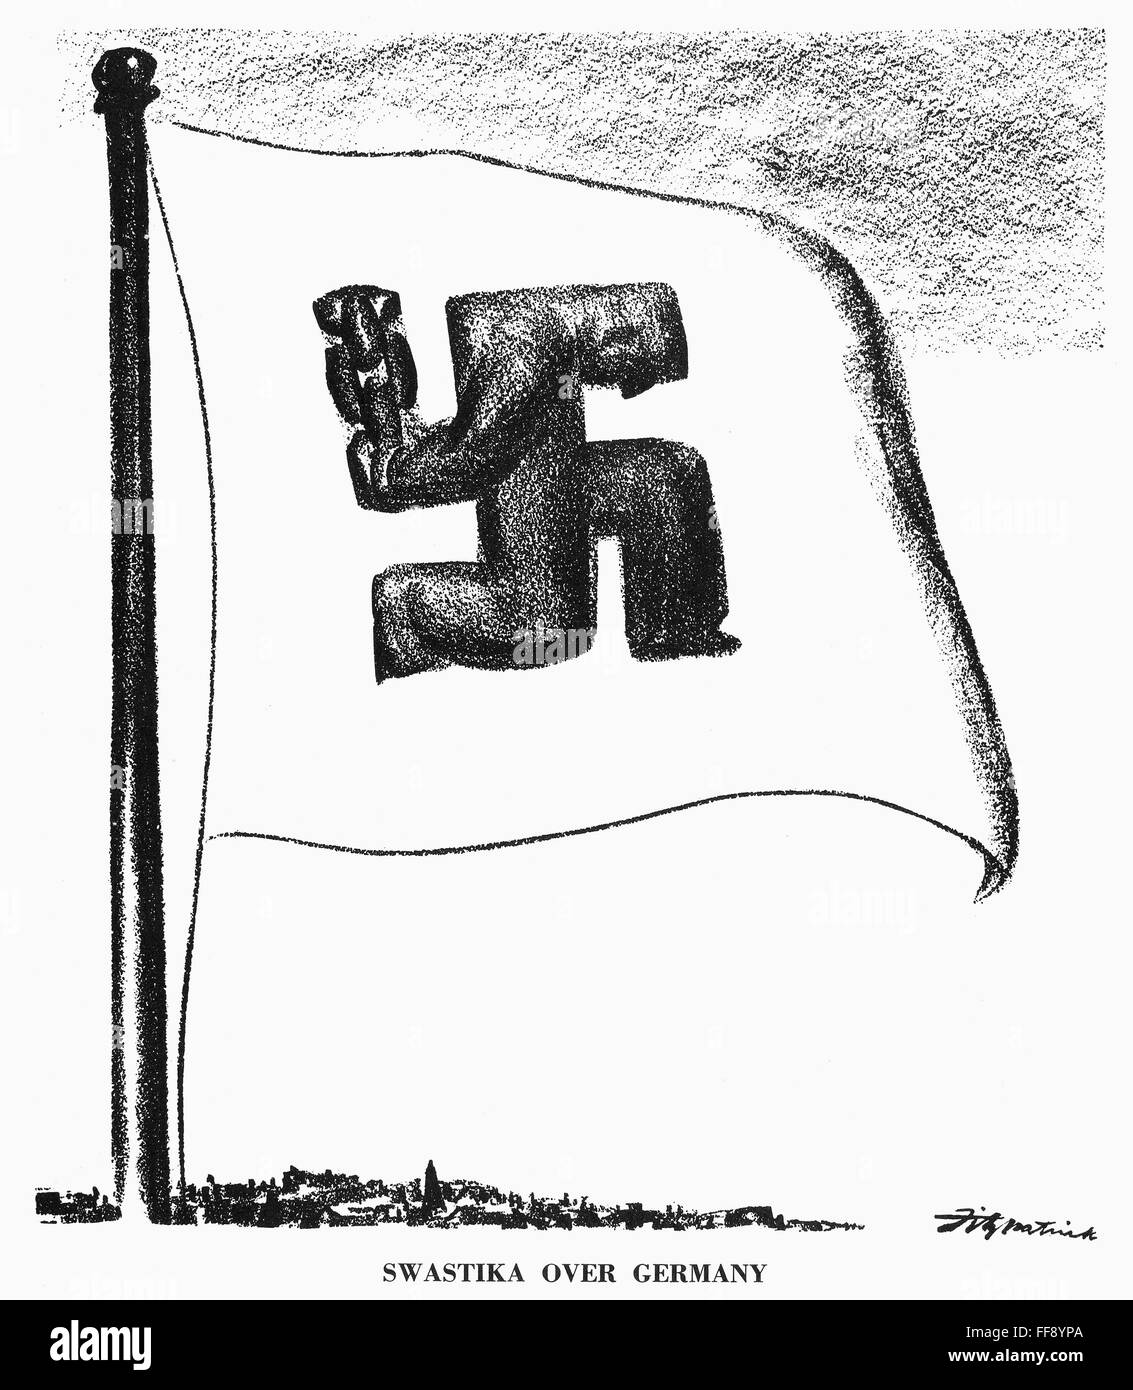 GERMANY, 1935. /n'Swastika over Germany.' American cartoon by D.R. Fitzpatrick, 1935, on the increasingly grim life in Germany under the National Socialist (Nazi) party and Adolf Hitler's totalitarian dictatorship. Stock Photo